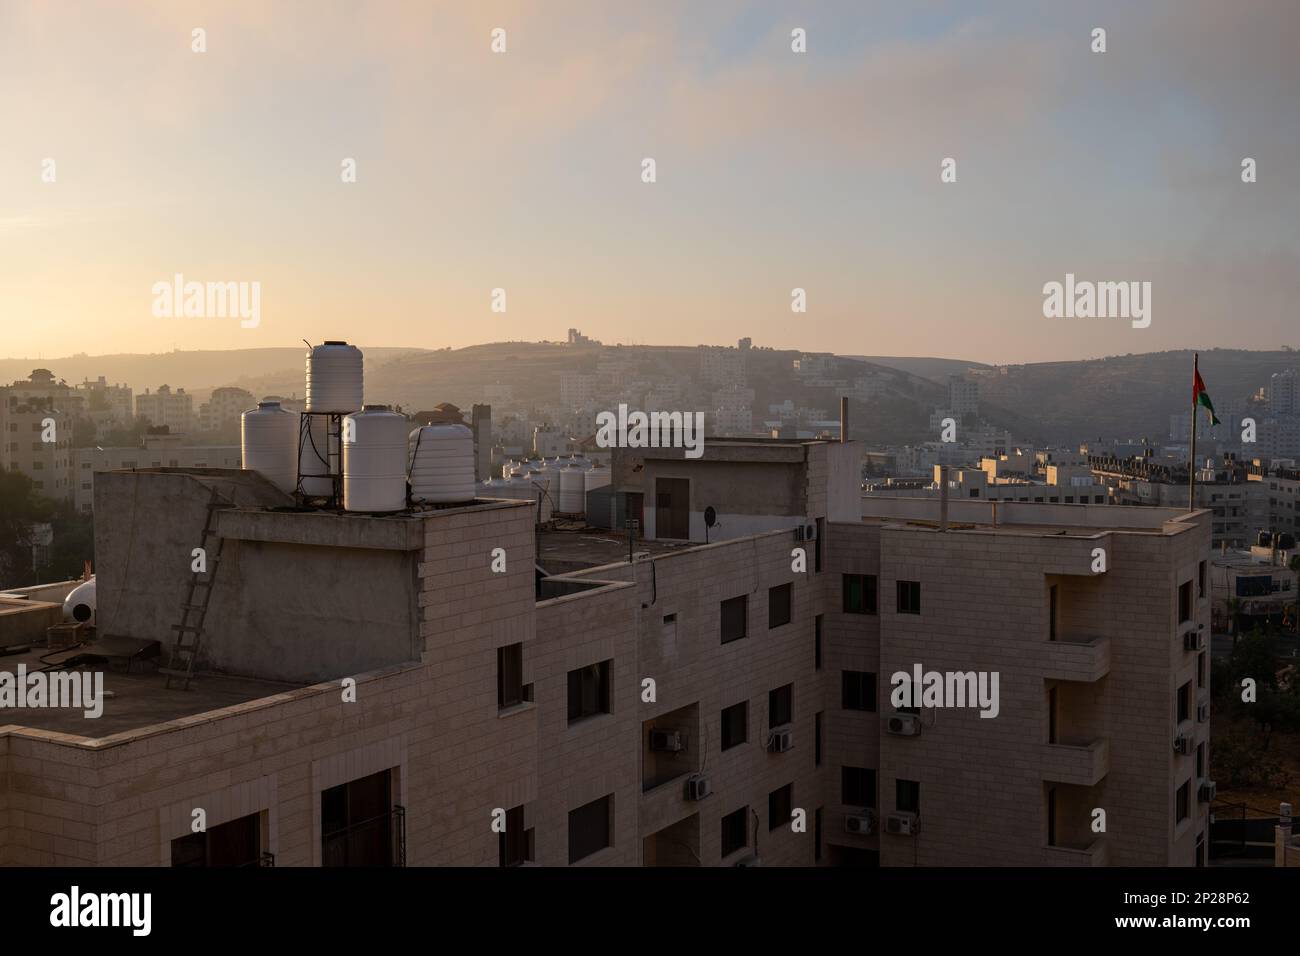 Ramallah Ramallah And Al Bireh Governorate Palestine 12 July 2022 Ramallah Cityscape At Dawn With High Buildings And Mountains Facing The Sun 2P28P62 